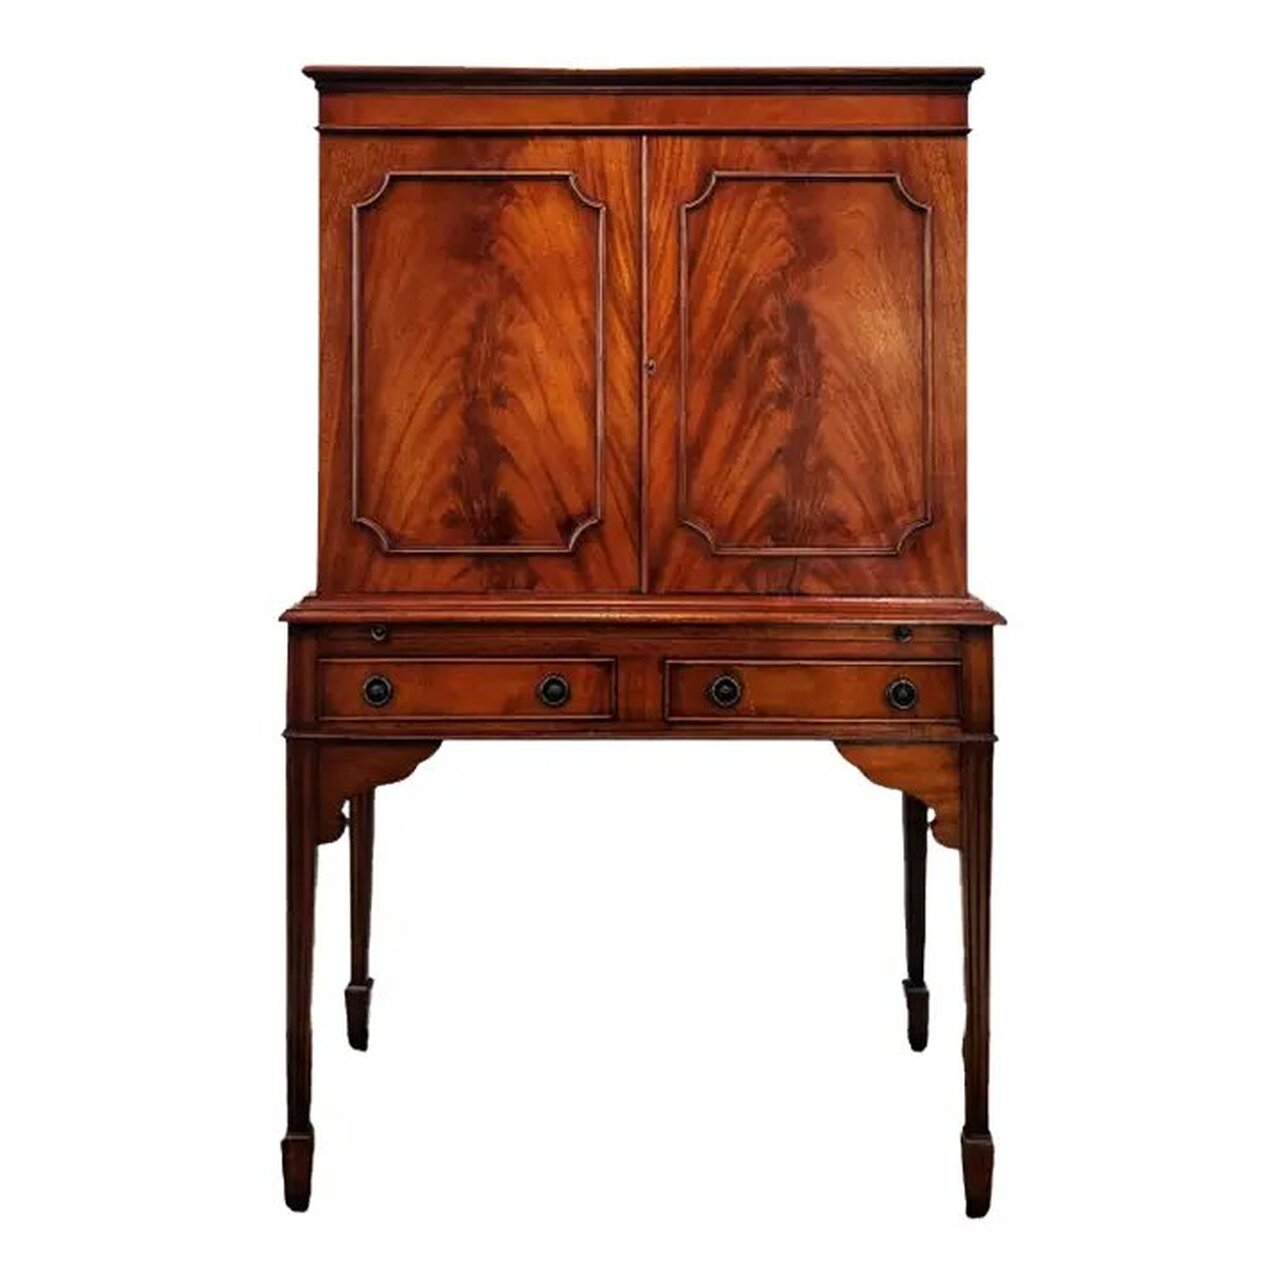 Georgian style mahogany cocktail cabinet was built by Bevan Funnell Ltd., Beach Road, Newhaven, Sussex, England. Bevan Funnel was established in 1945 and is known for bespoke and classically influenced furniture designs.  This drinks cabinet was constructed from mahogany wood in the mid-to-late-20th-century. The top and sides feature ribbon figured mahogany and the door fronts feature flame, or crotch cut, mahogany.  Under the flat top with molded edge is a cabinet with two locking doors lined on the interior with plain sycamore wood. The interior of the cabinet is lined with figured sycamore wood and mirrored on the back and bottom. A light fixture at top turns on when plugged in. The interior also contains a removable shaped sycamore wood shelf.  The cabinet comes with a key.  Below the cabinet is a pull-out shelf for use as a cocktail prep station. The shelf easily slides forward with a pull on the two round brass knobs.  Two frieze drawers are located under the pull-out shelf and may be opened with a tug on the circular ring pulls over round decorative escutcheons.  Curvy supports are placed under the front apron where the front legs attach.  All four legs are square fluted tapers ending in spade feet.  All hardware is solid brass.  This mahogany cocktail cabinet will complement interiors with elements of Georgian, Sheraton, Hepplewhite, Chippendale, Queen Anne, Victorian and Edwardian Sheraton styles.  The cabinet will blend nicely with your Bevan Funnell ranges 